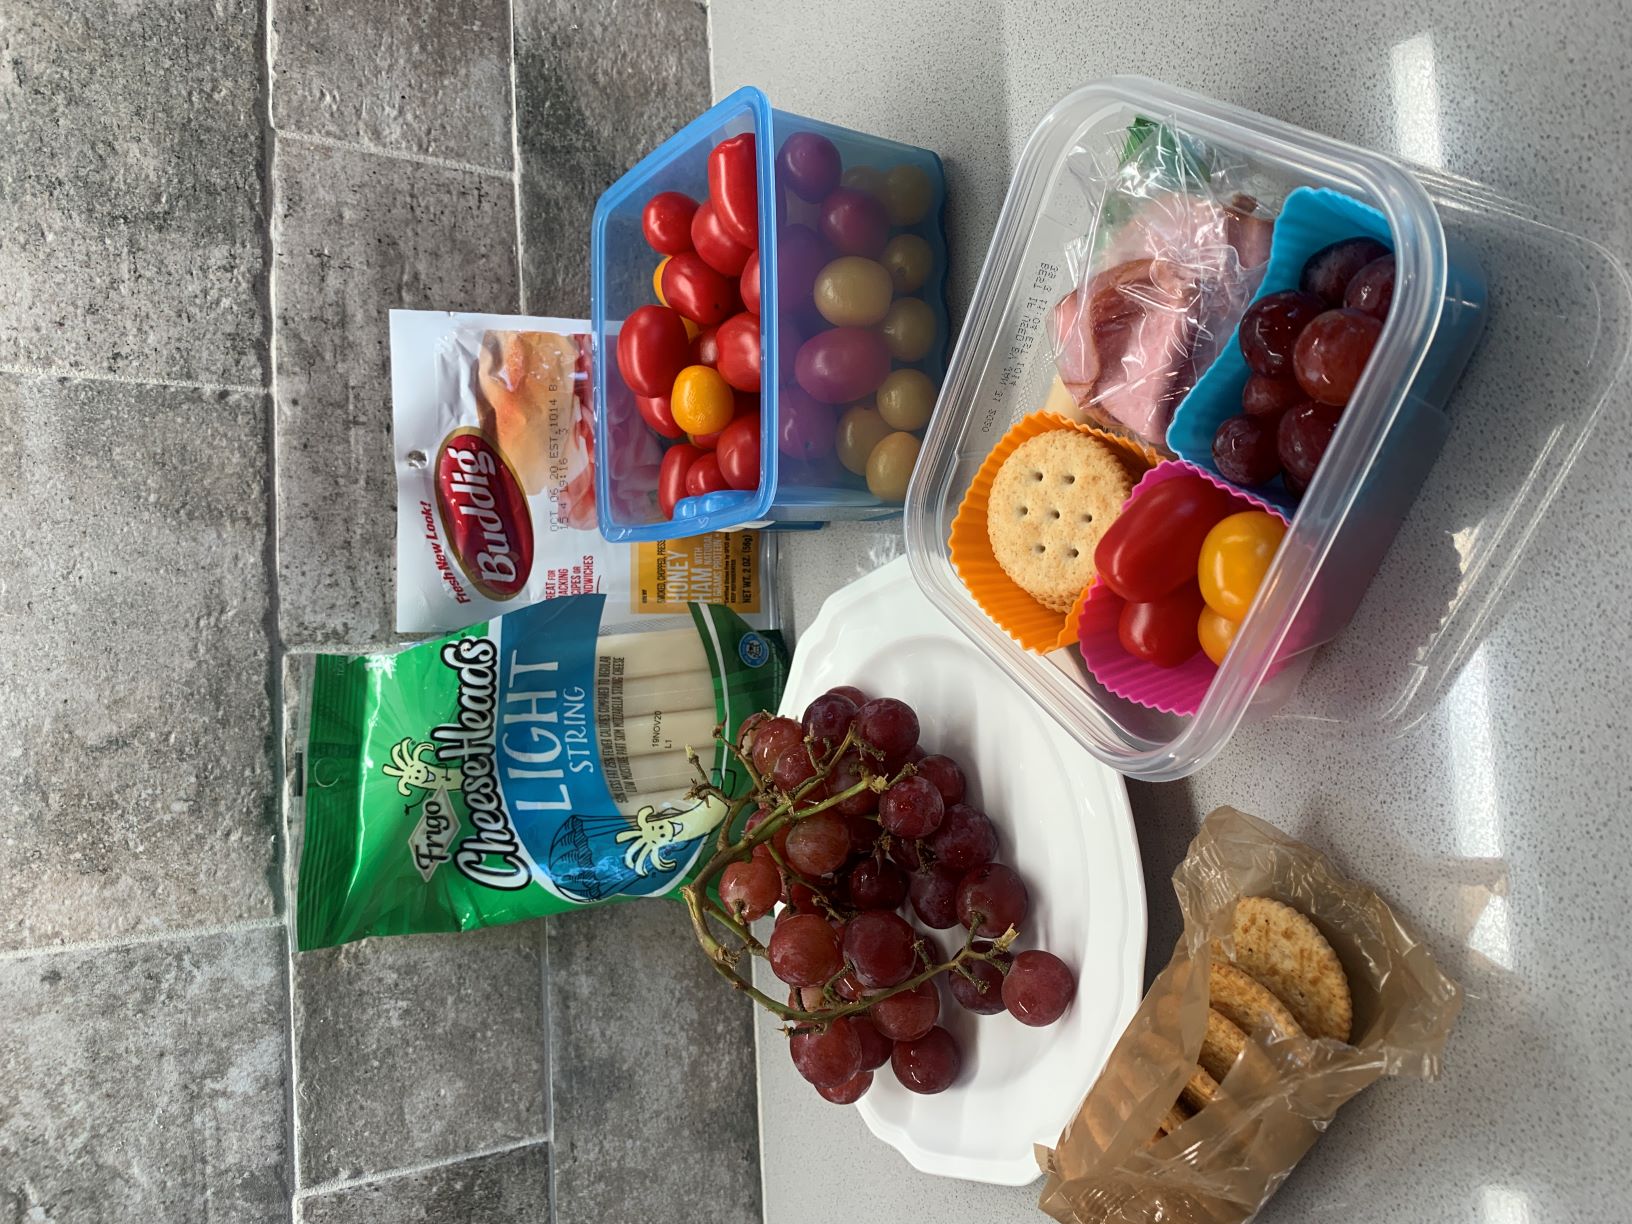 example of a homemade lunchable - grapes, tomatoes, cheese stick, ham slices, crackers